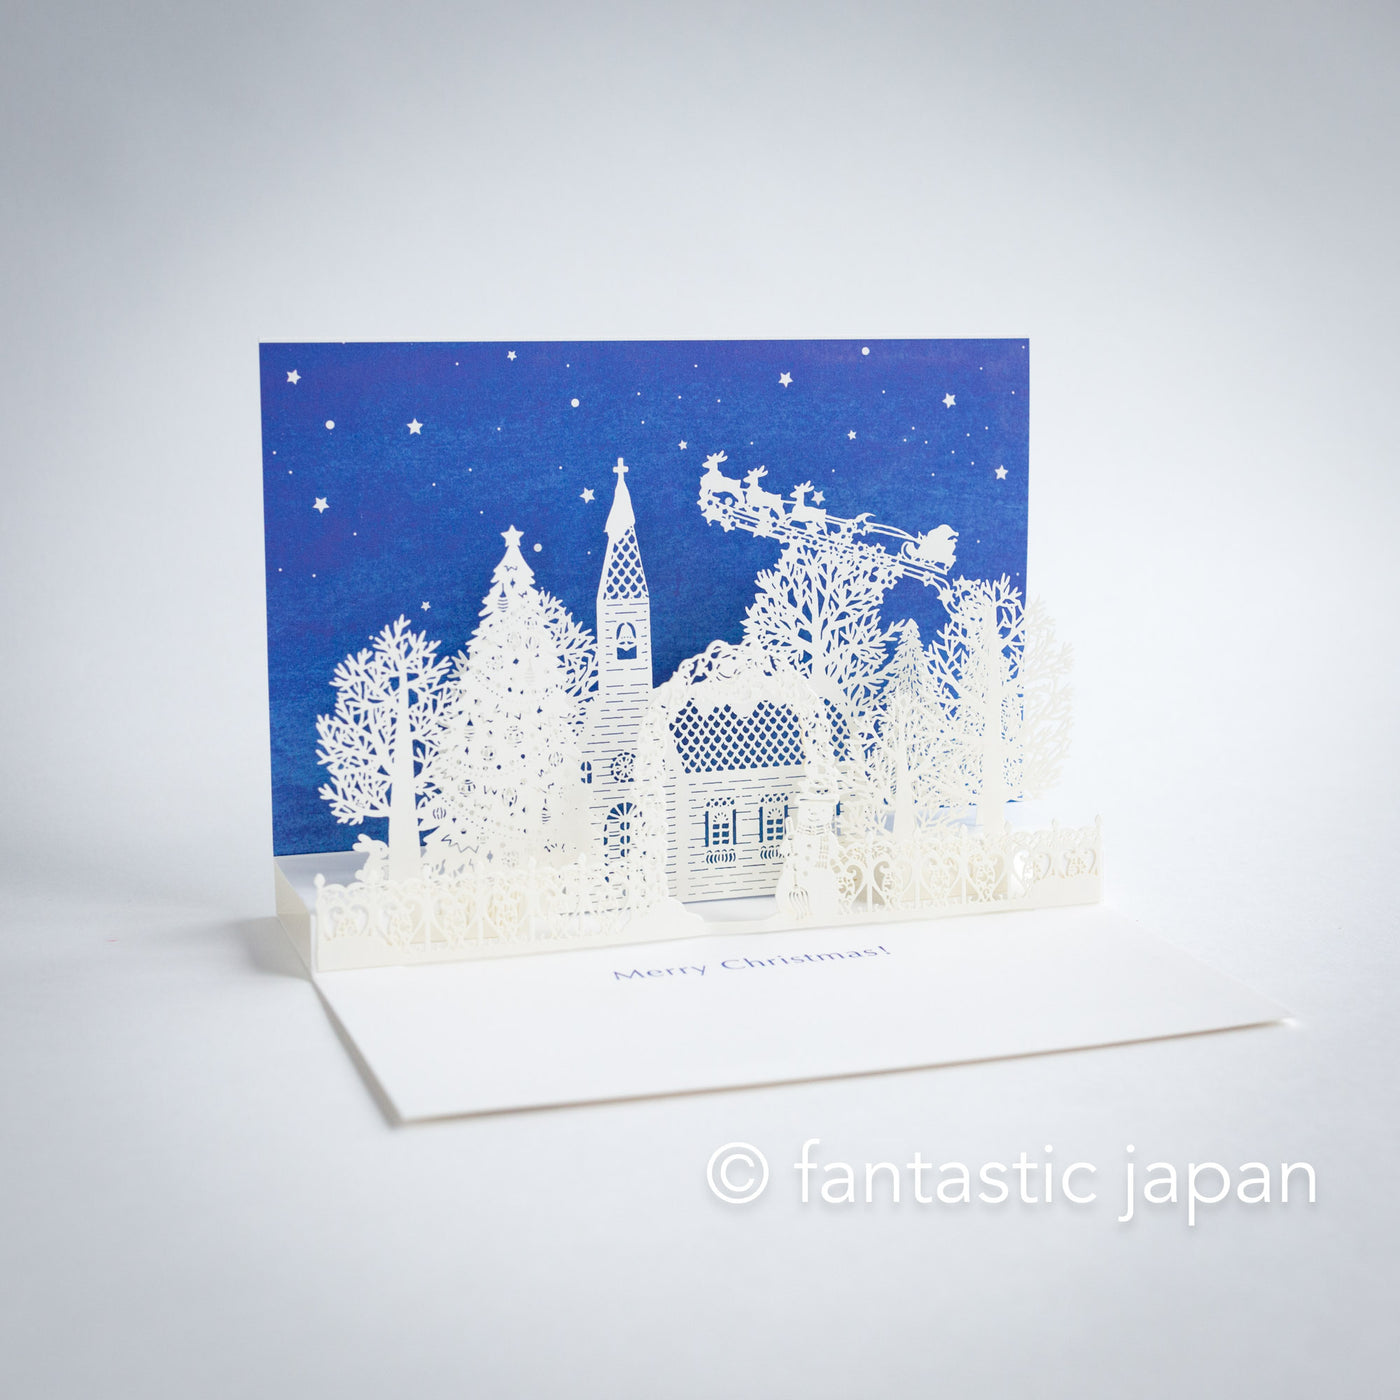 Our holiday cards selection